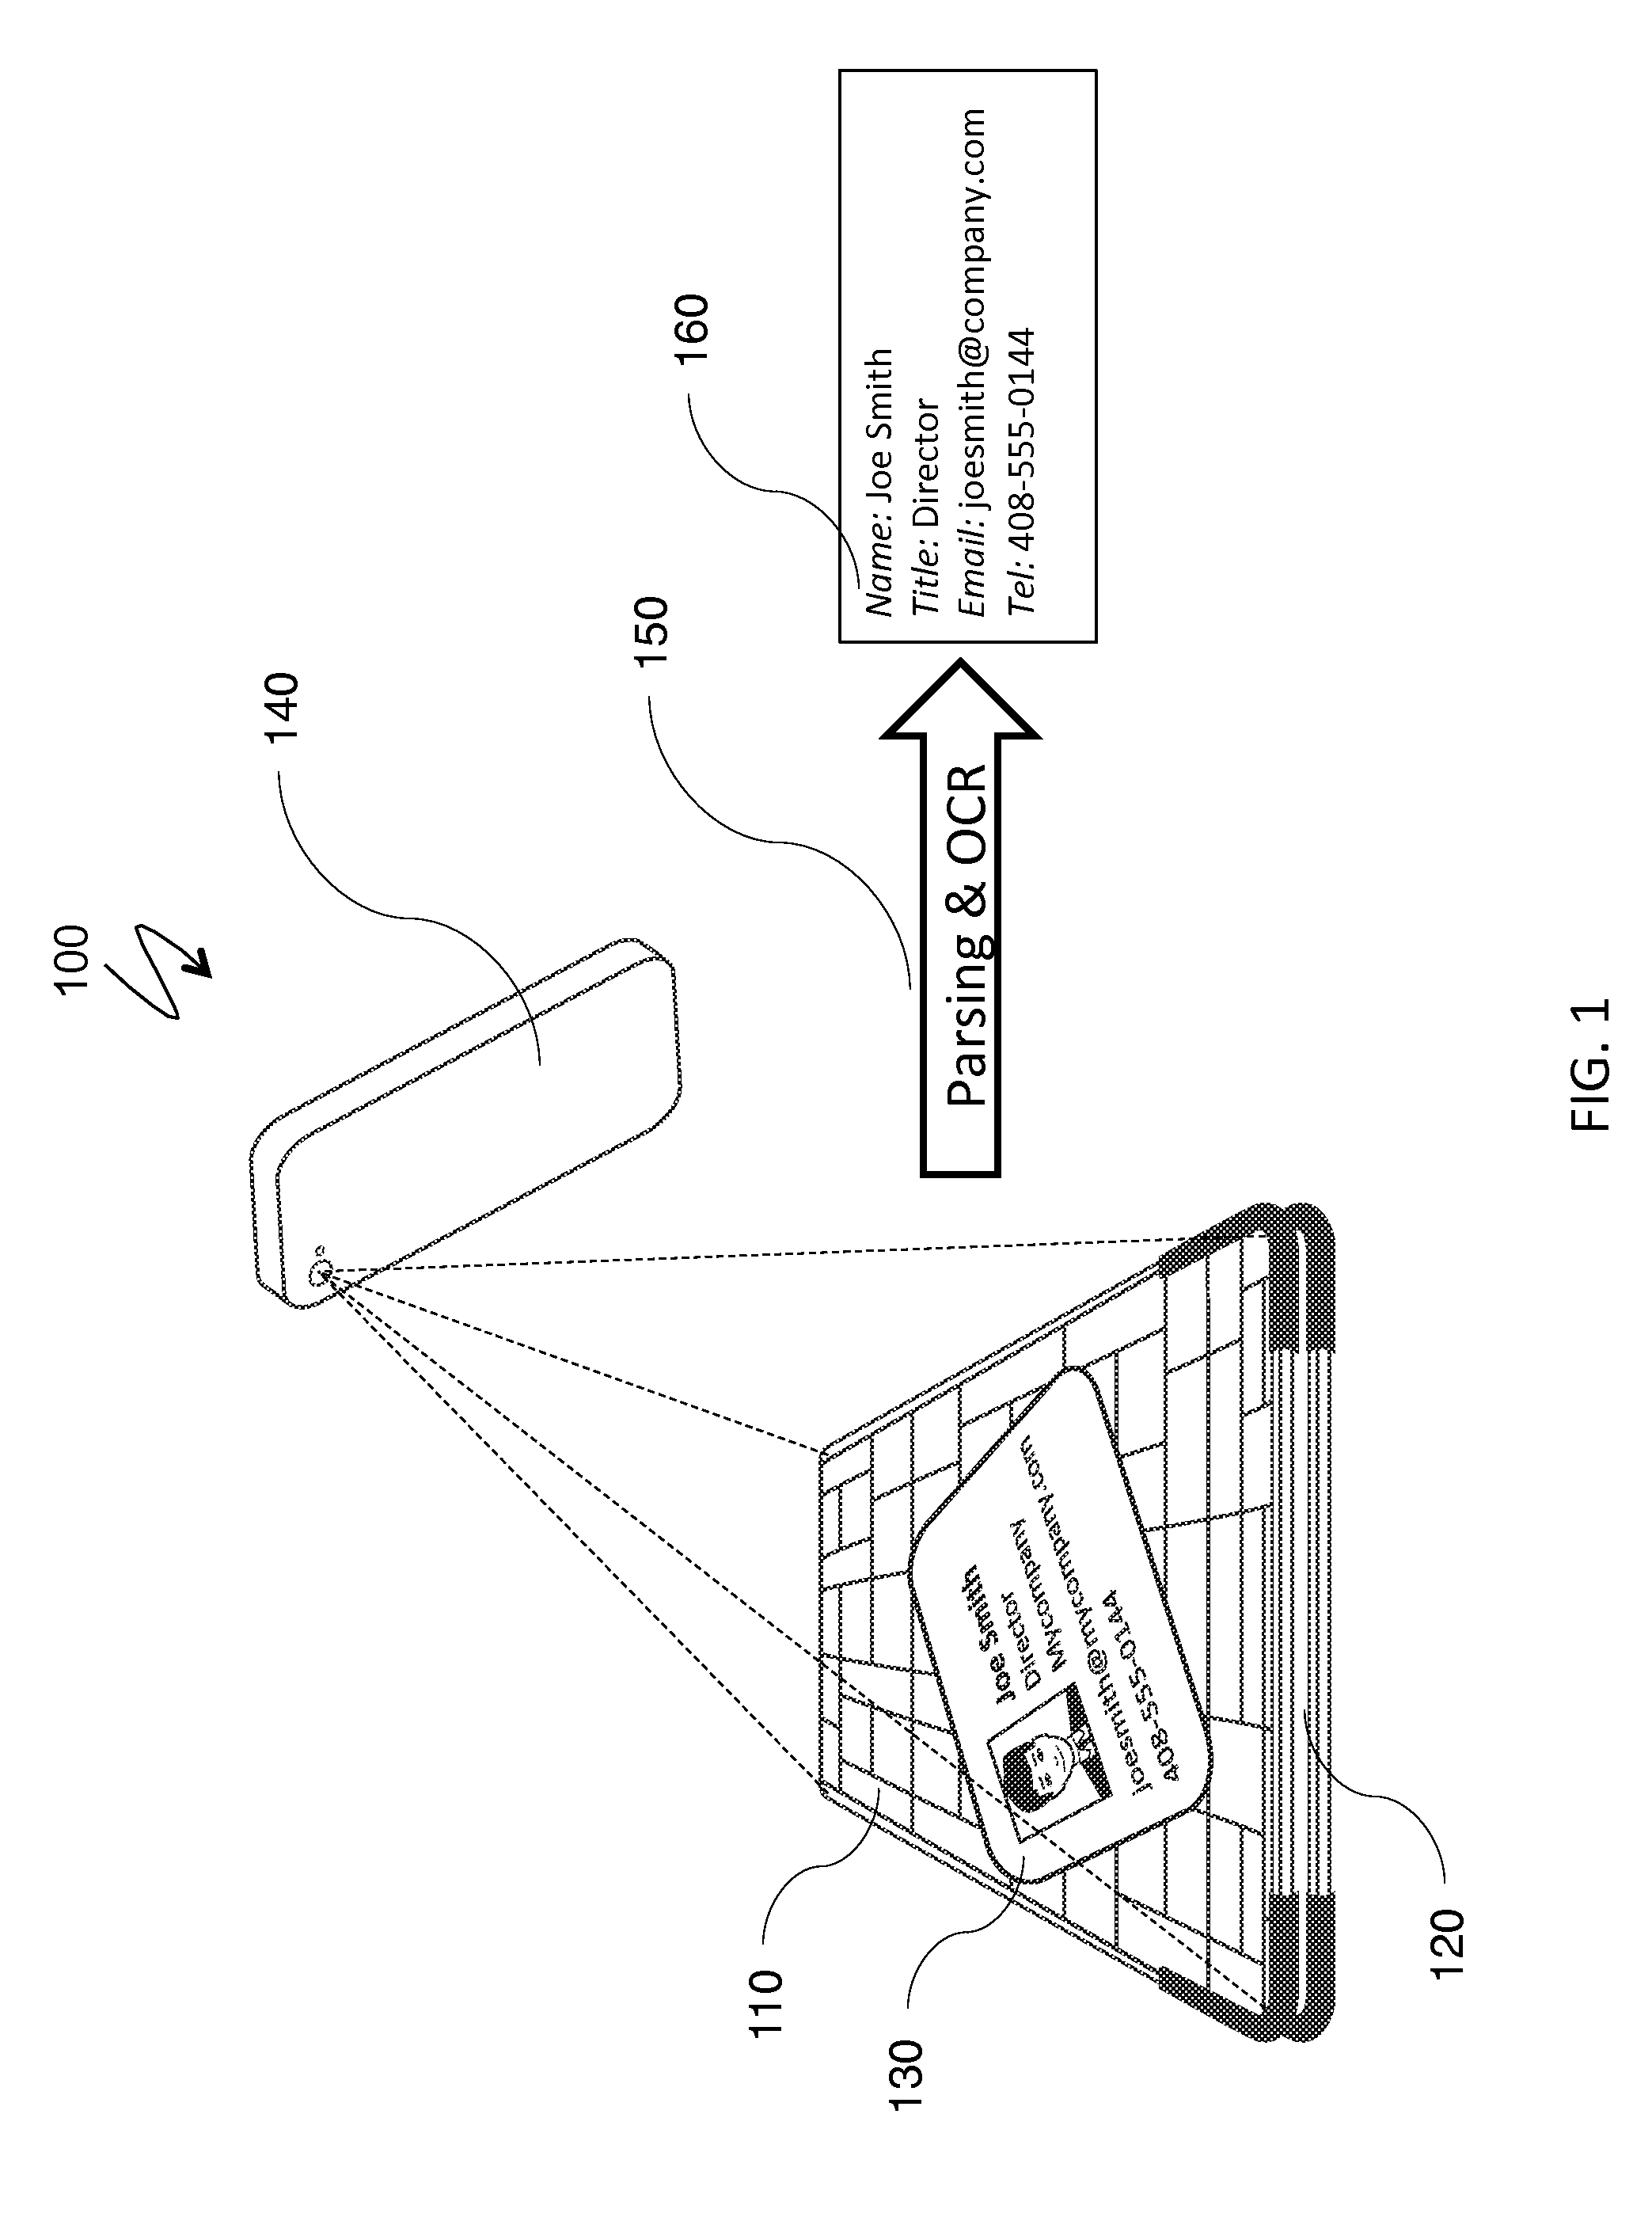 Using surfaces with printed patterns for image and data processing